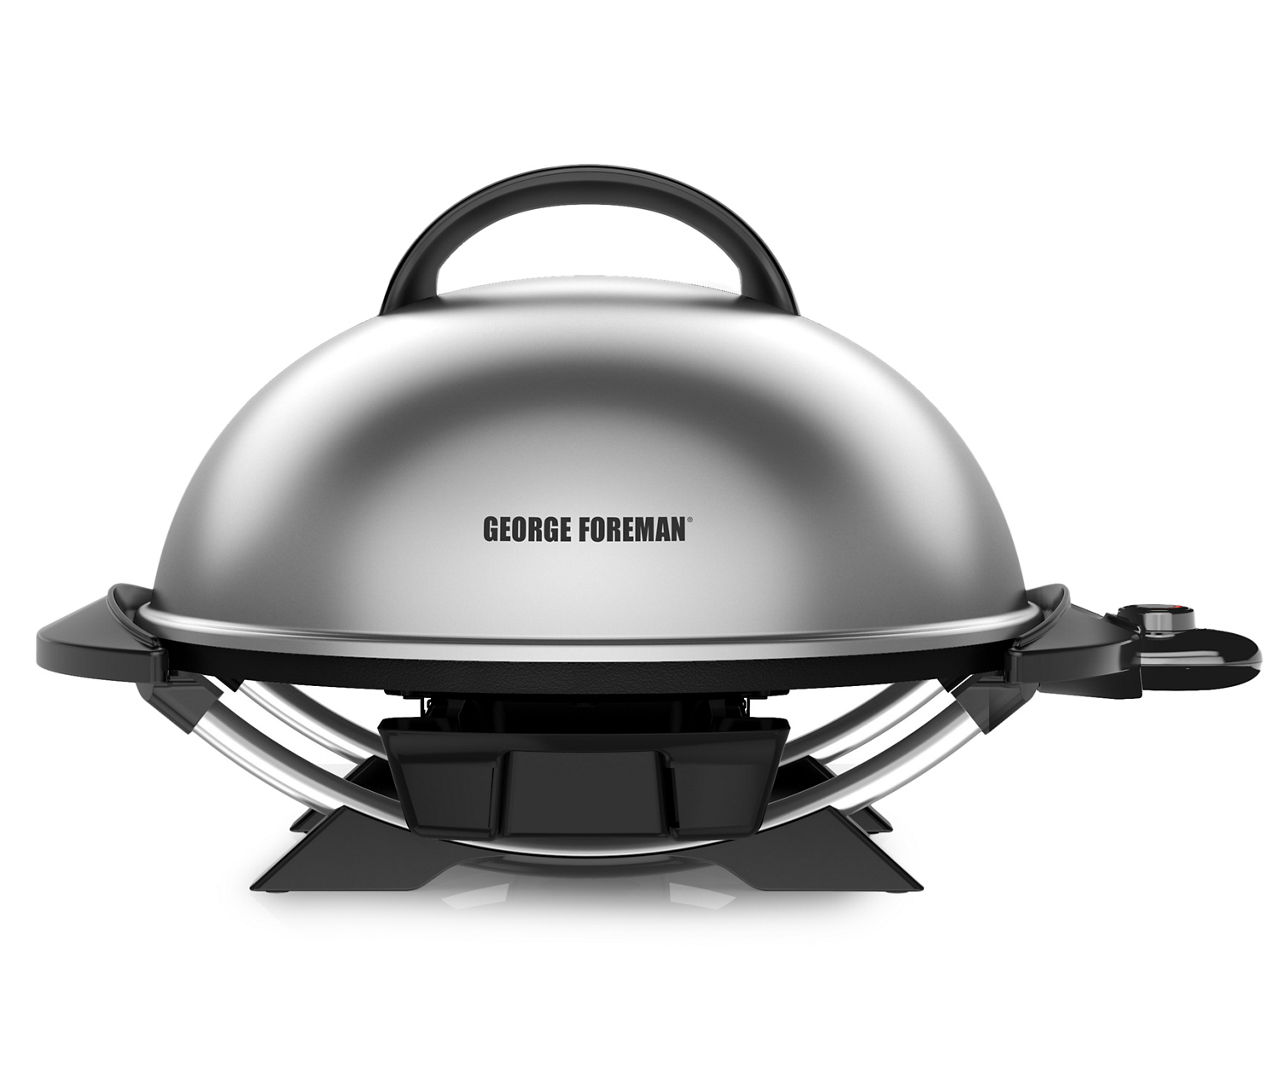 George Foreman Grill Cooking - Eat at Home